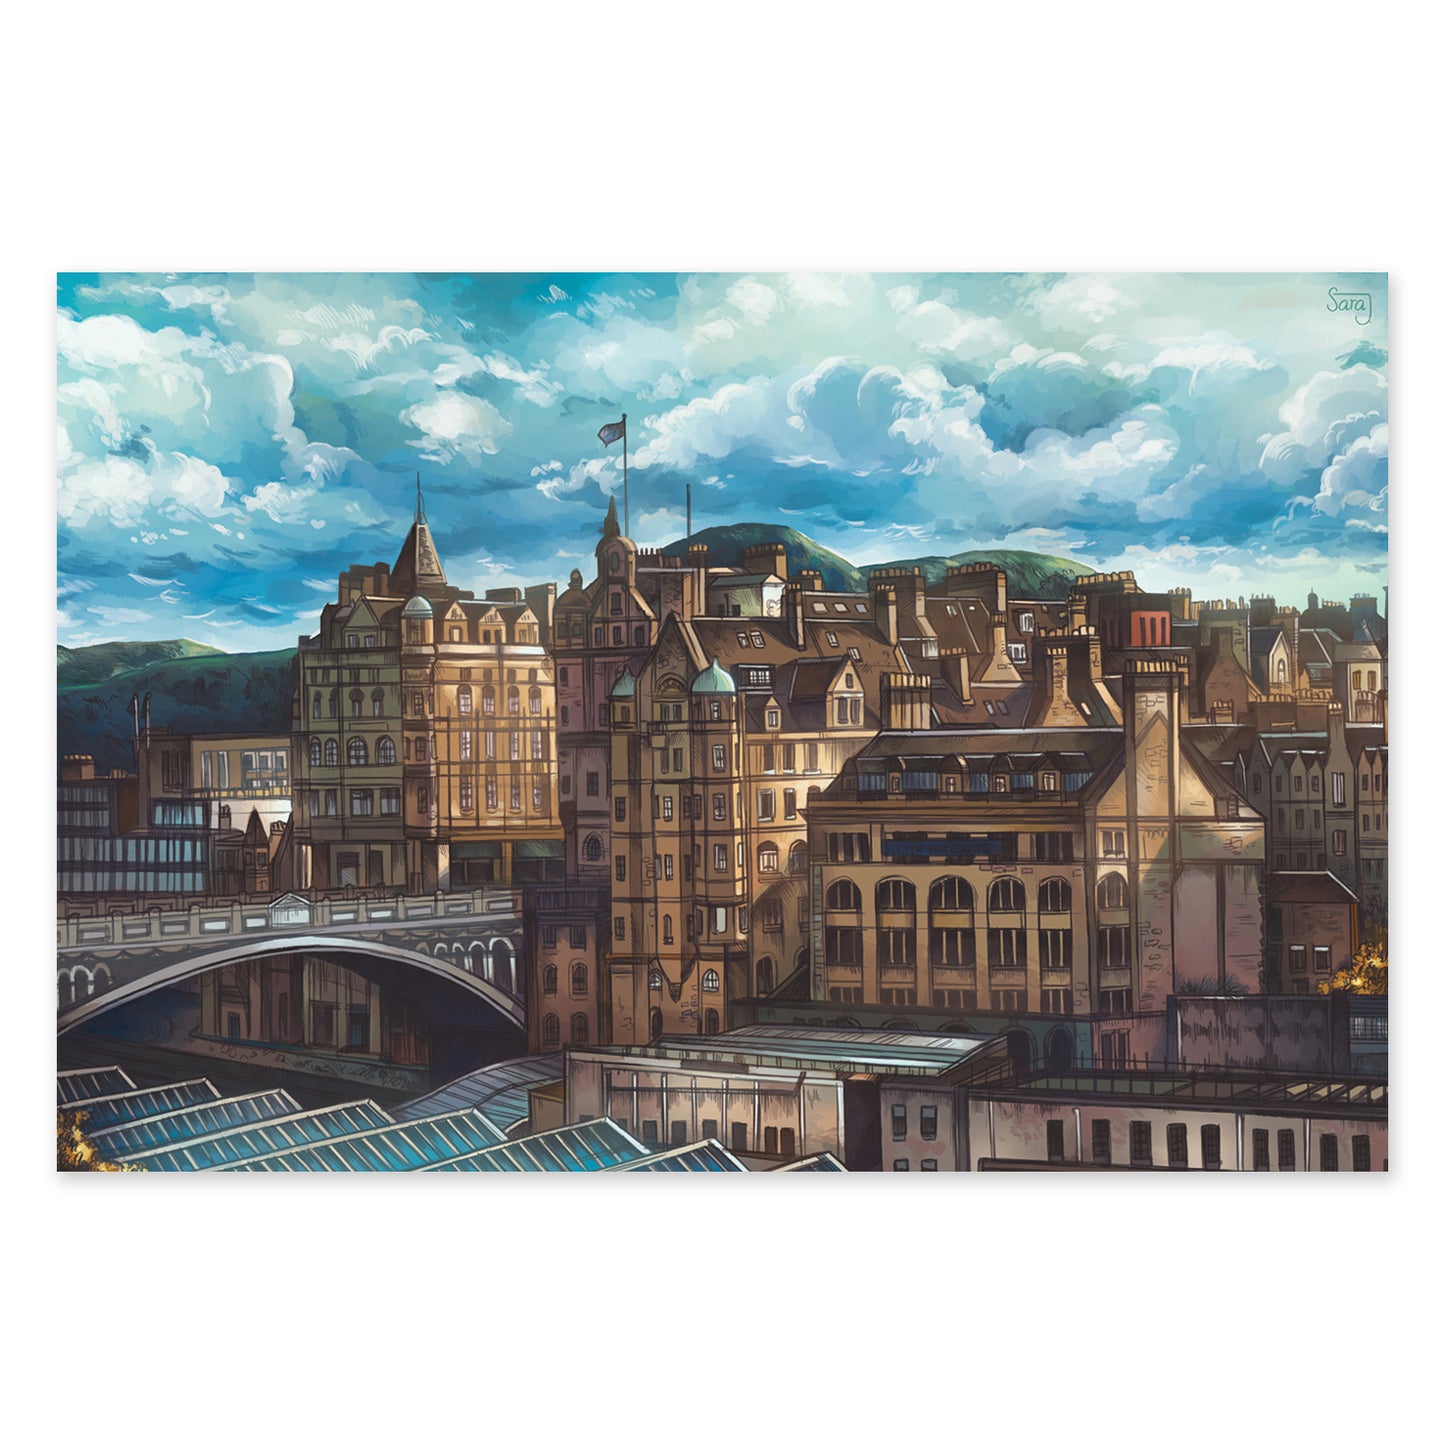 Art Print of Cityscape - view of North-Bridge from Princes Street point of view.